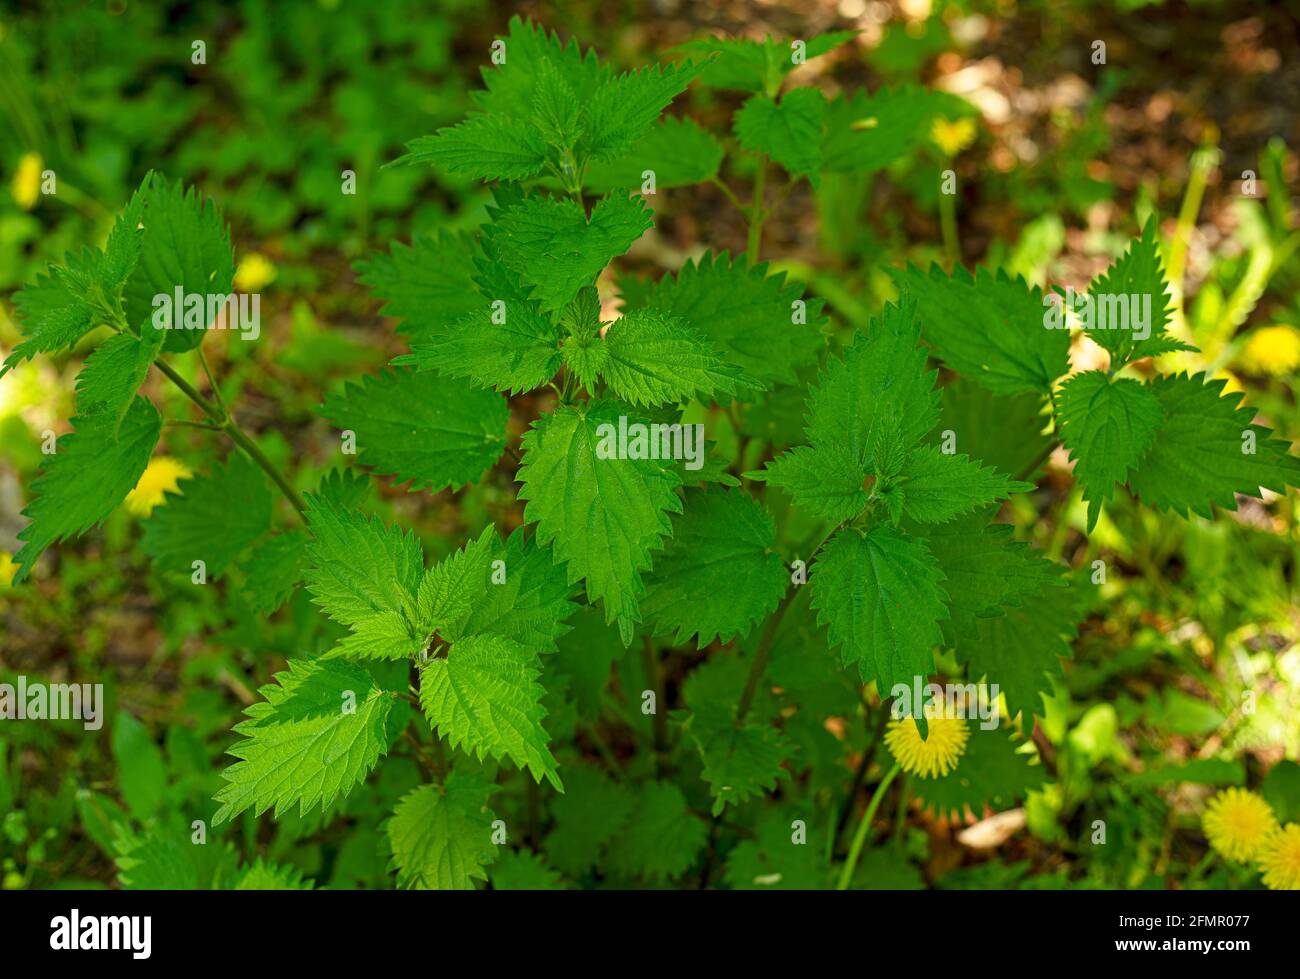 A background of bright green nettle leaves Stock Photo